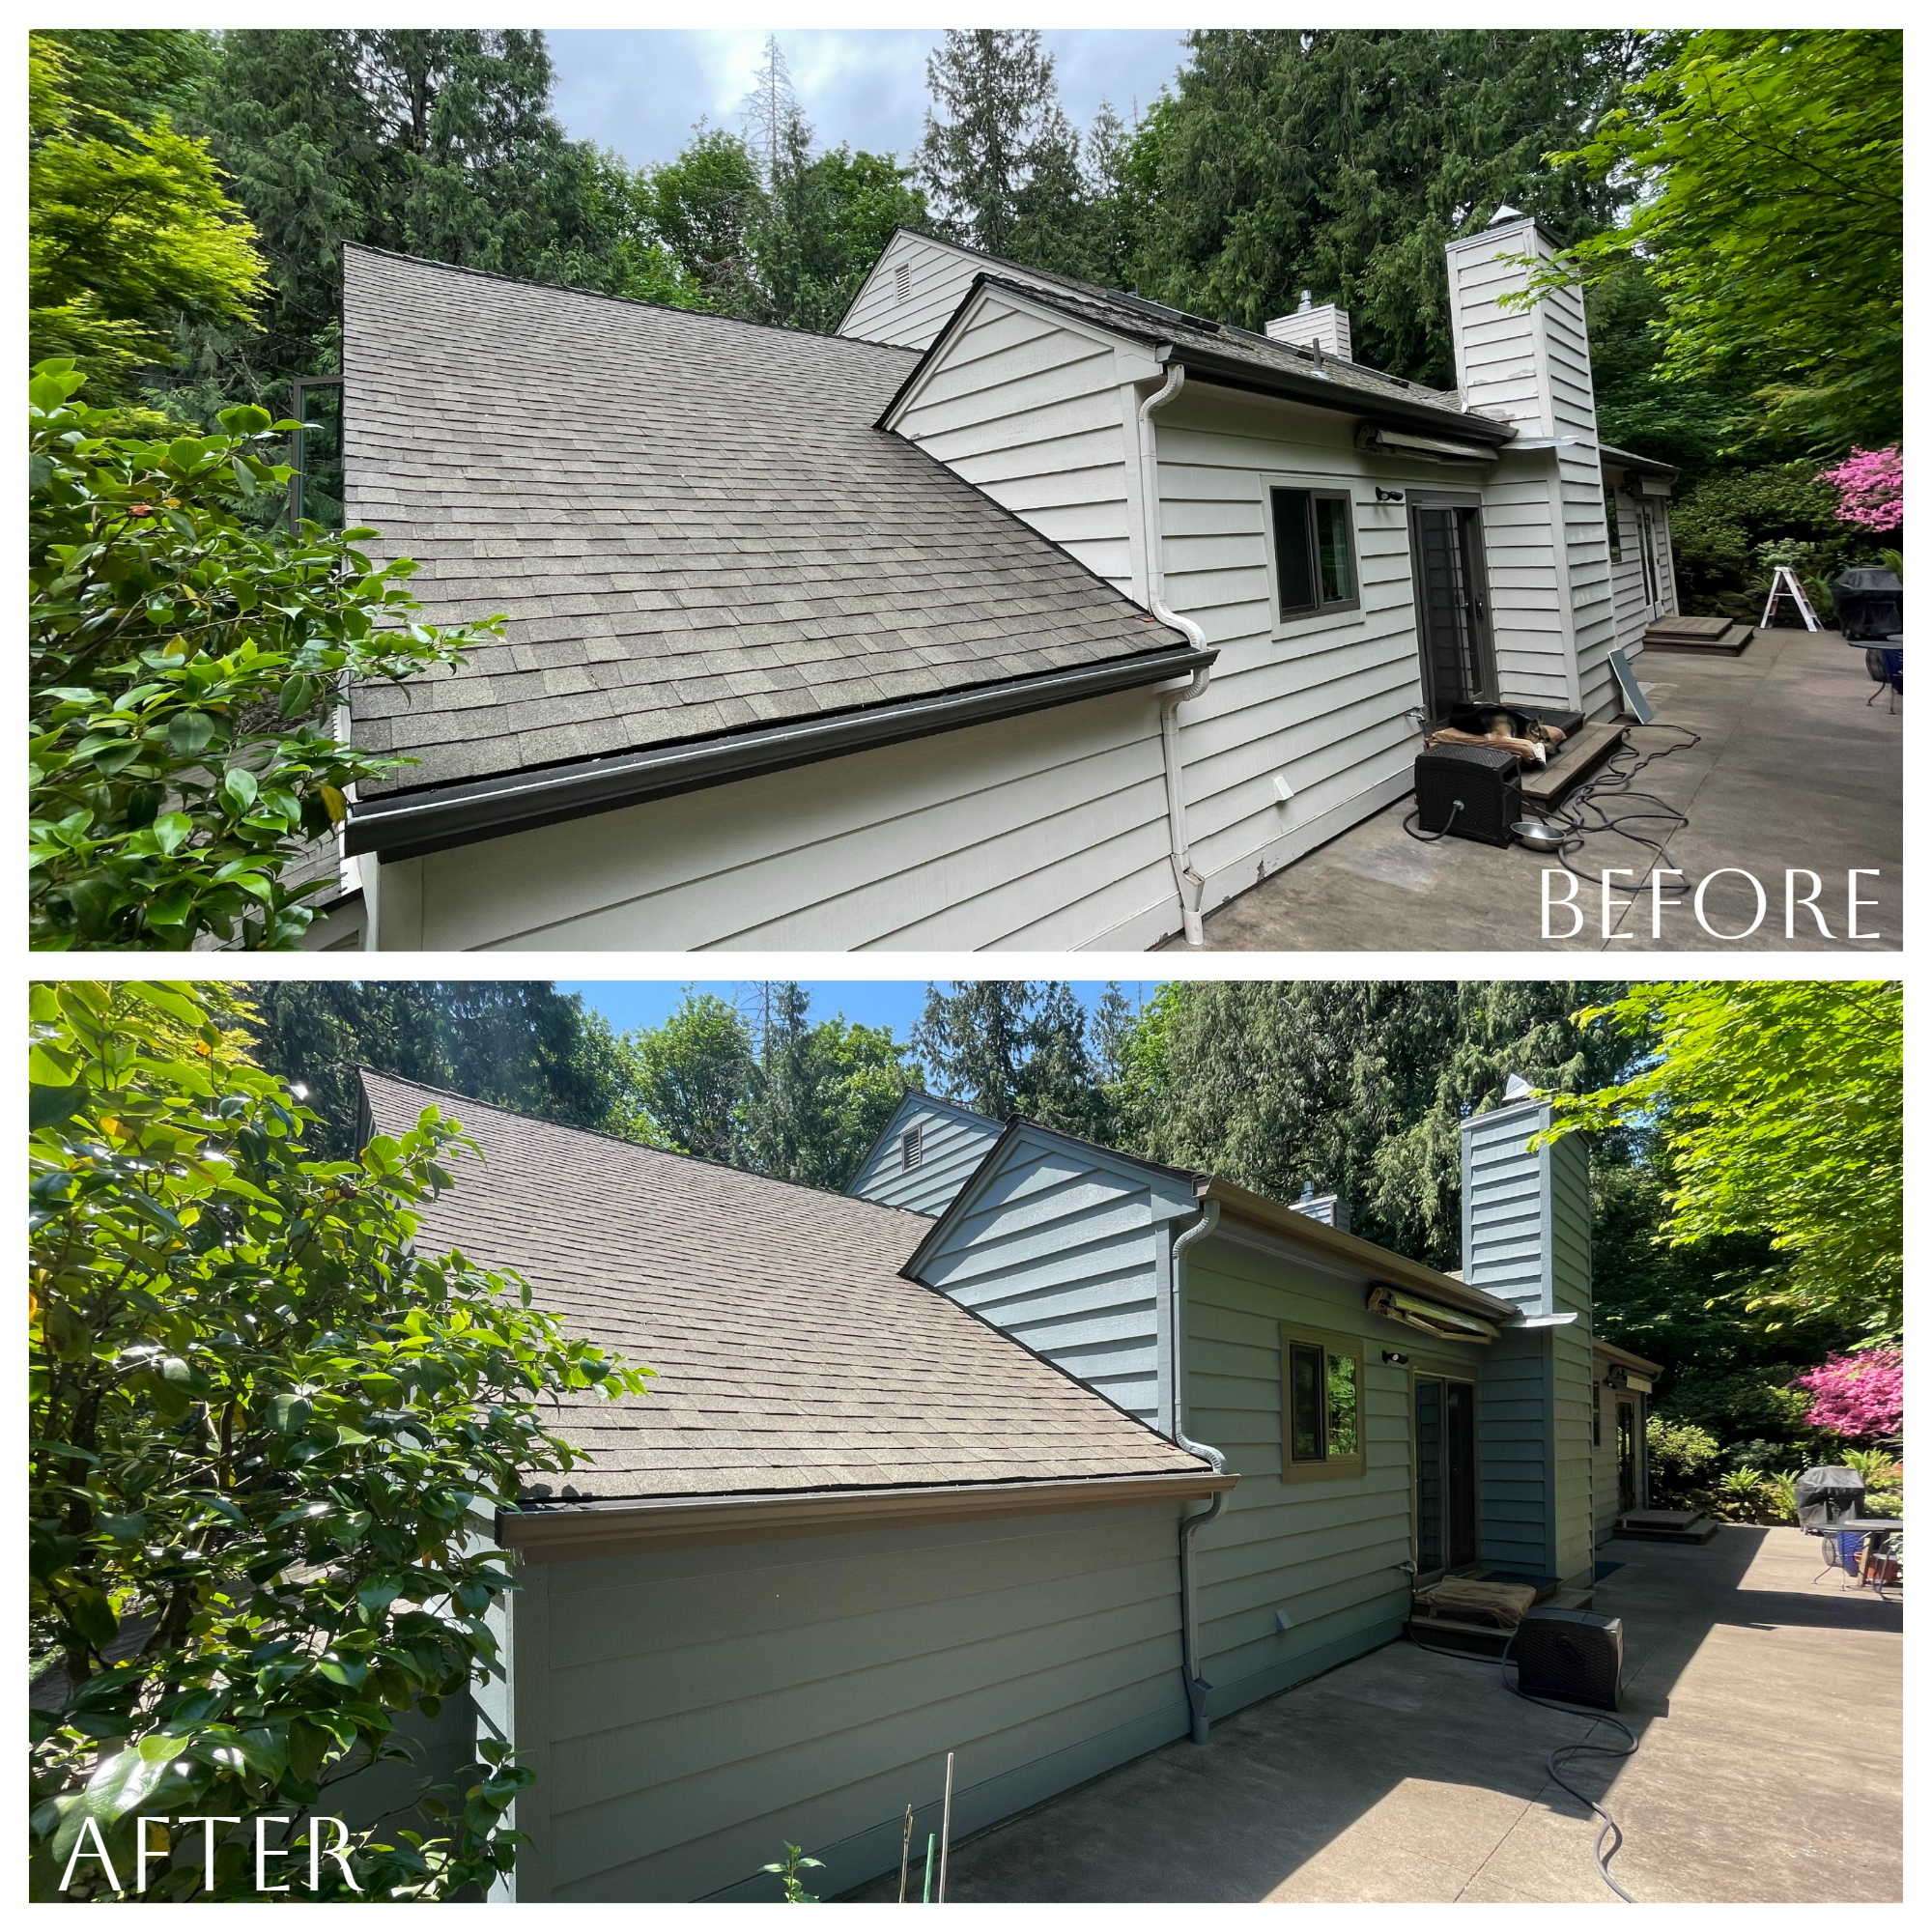 Before and after pictures of a house with a new roof and exterior paint job in the summer.